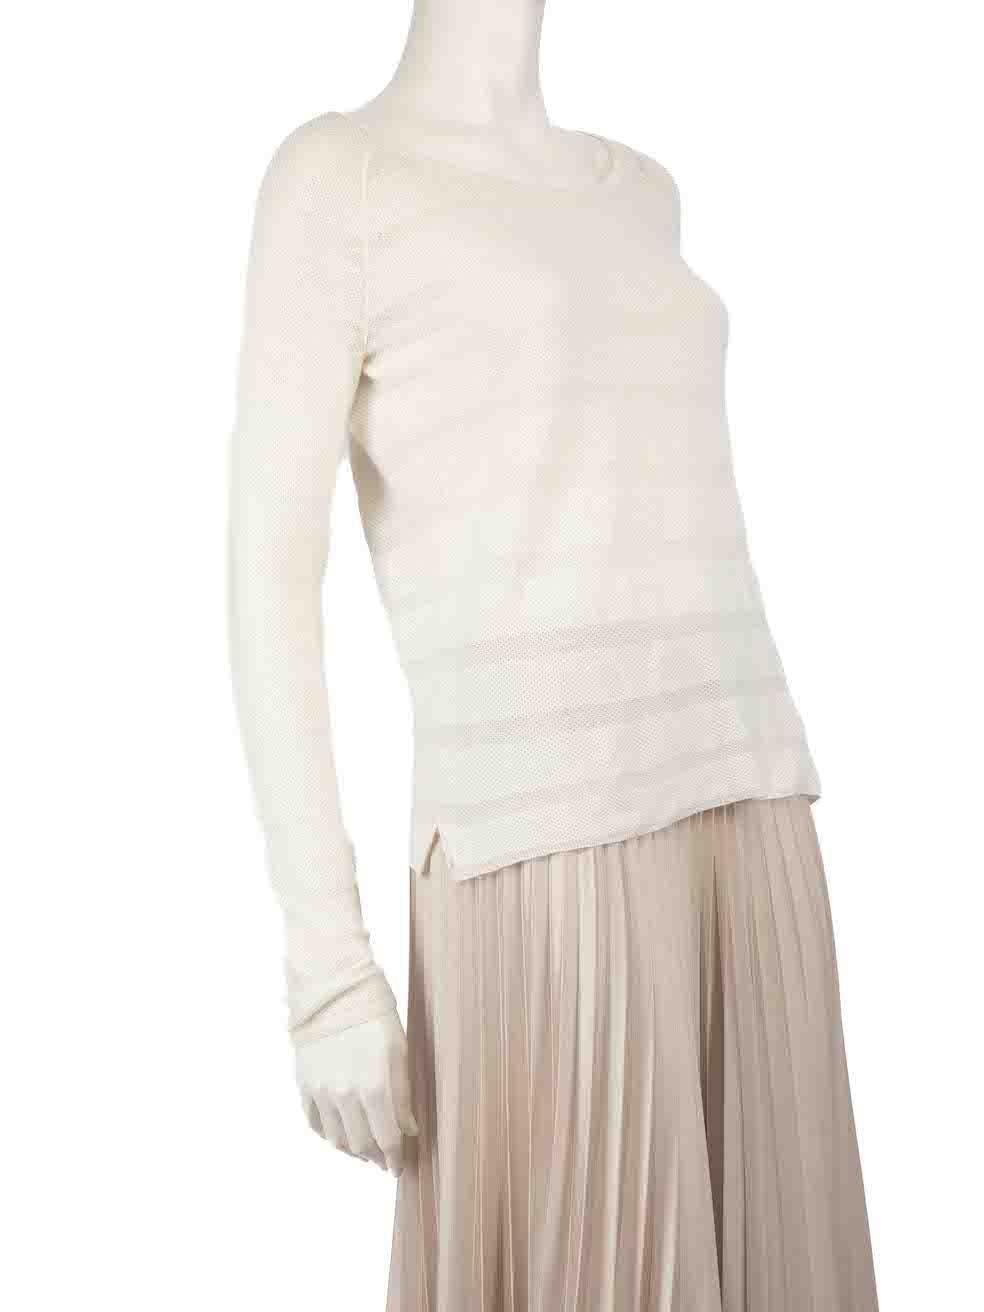 CONDITION is Very good. Minimal wear to jumper is evident. Minimal pilling to overall material as well as pull thread to knit on the front and left sleeve on this used Loro Piana designer resale item.
 
 
 
 Details
 
 
 Cream
 
 Cashmere
 
 Knit